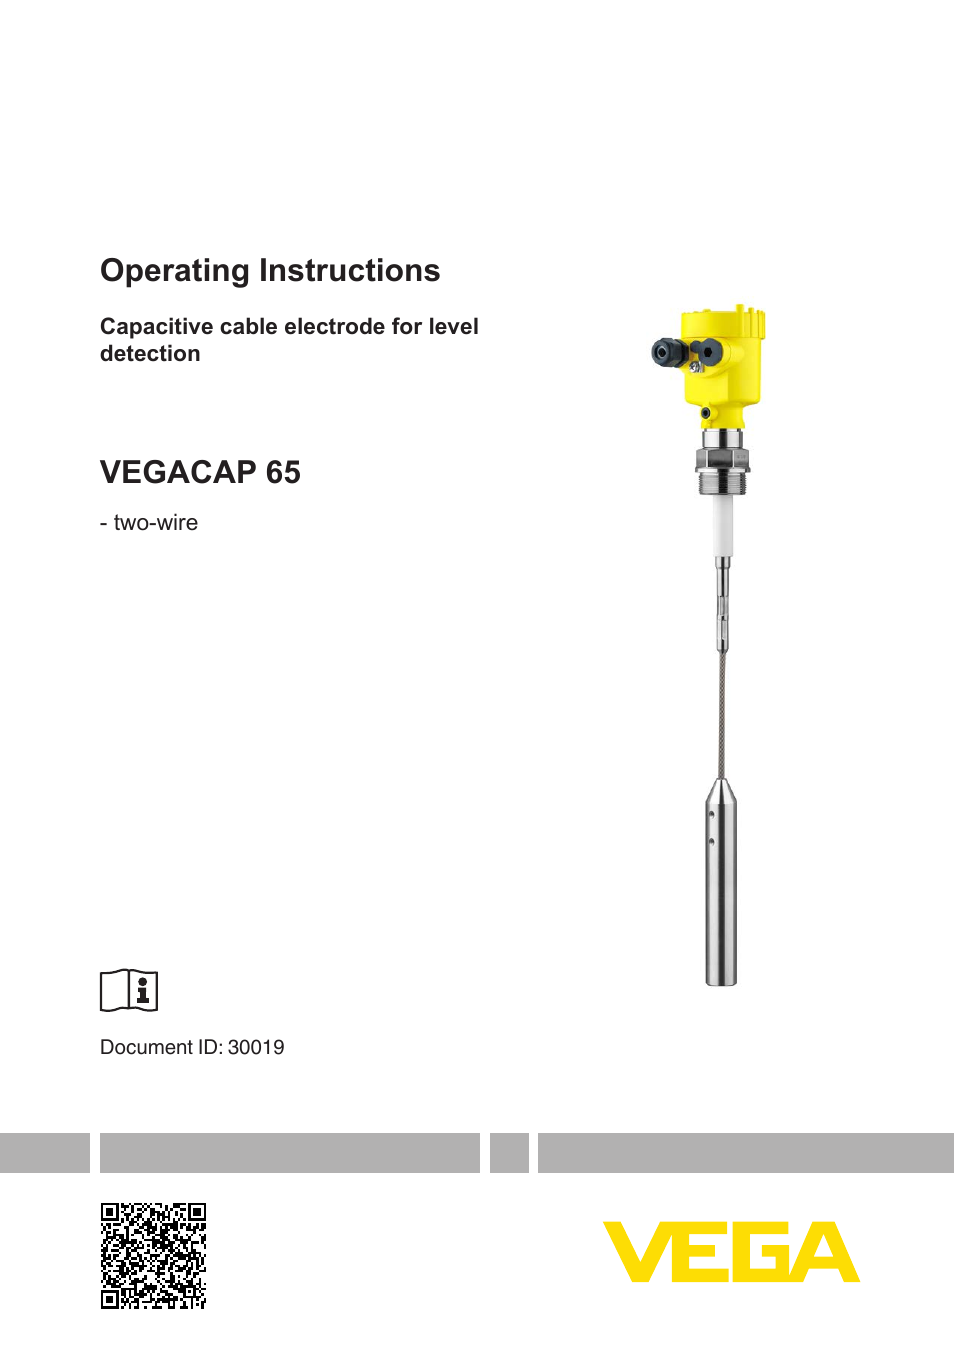 VEGACAP 65 - two-wire